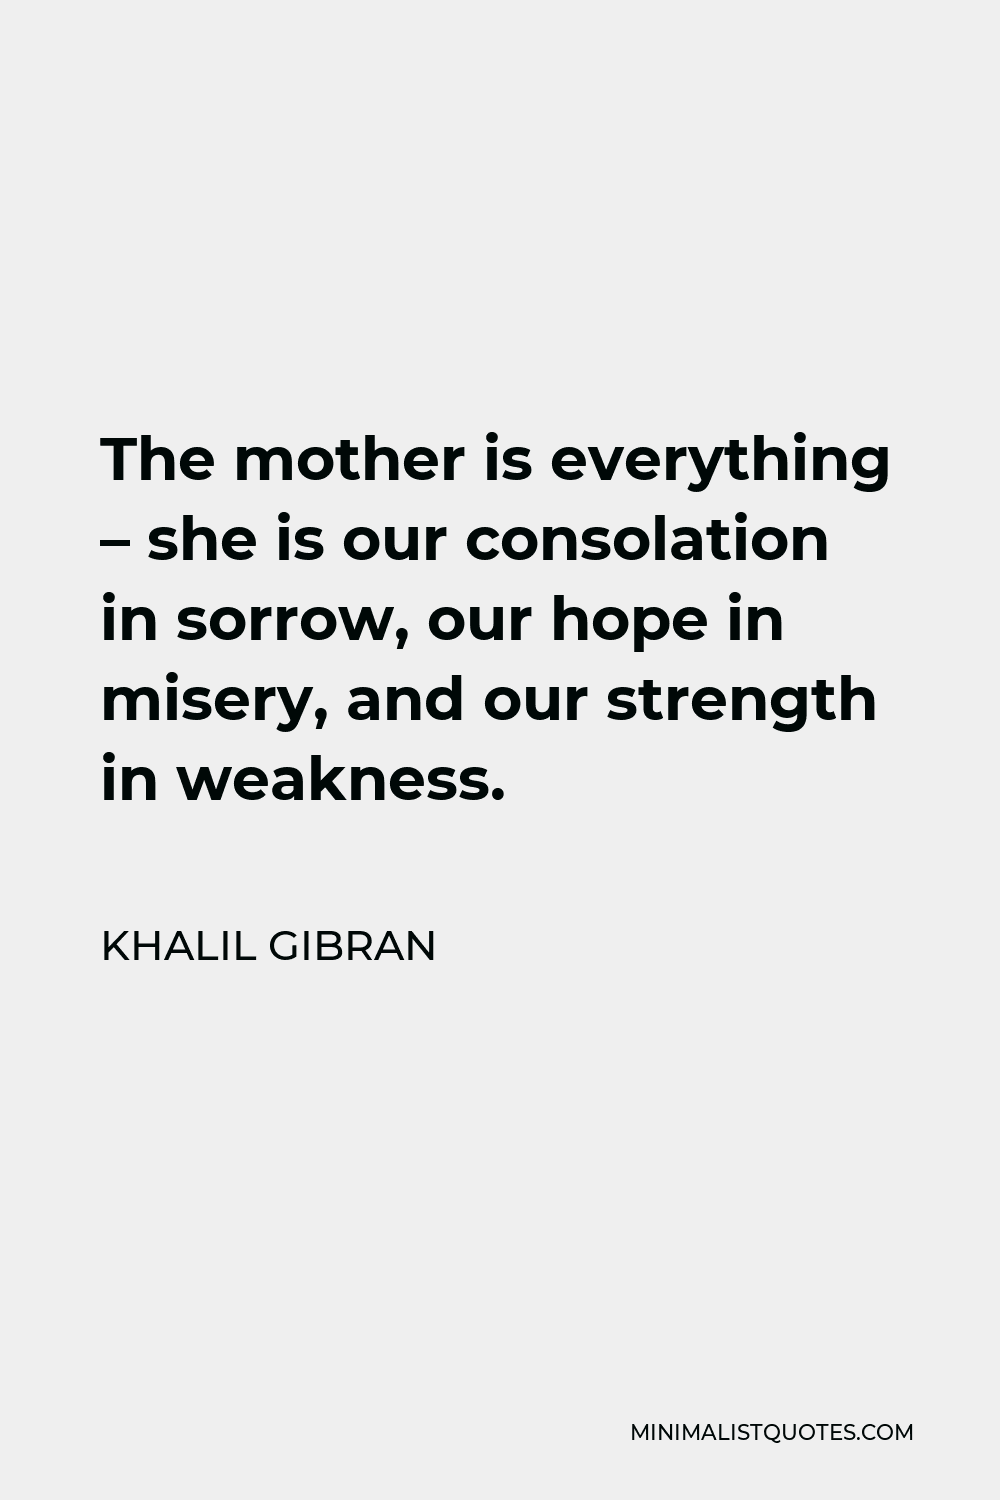 Khalil Gibran Quote - The mother is everything – she is our consolation in sorrow, our hope in misery, and our strength in weakness.